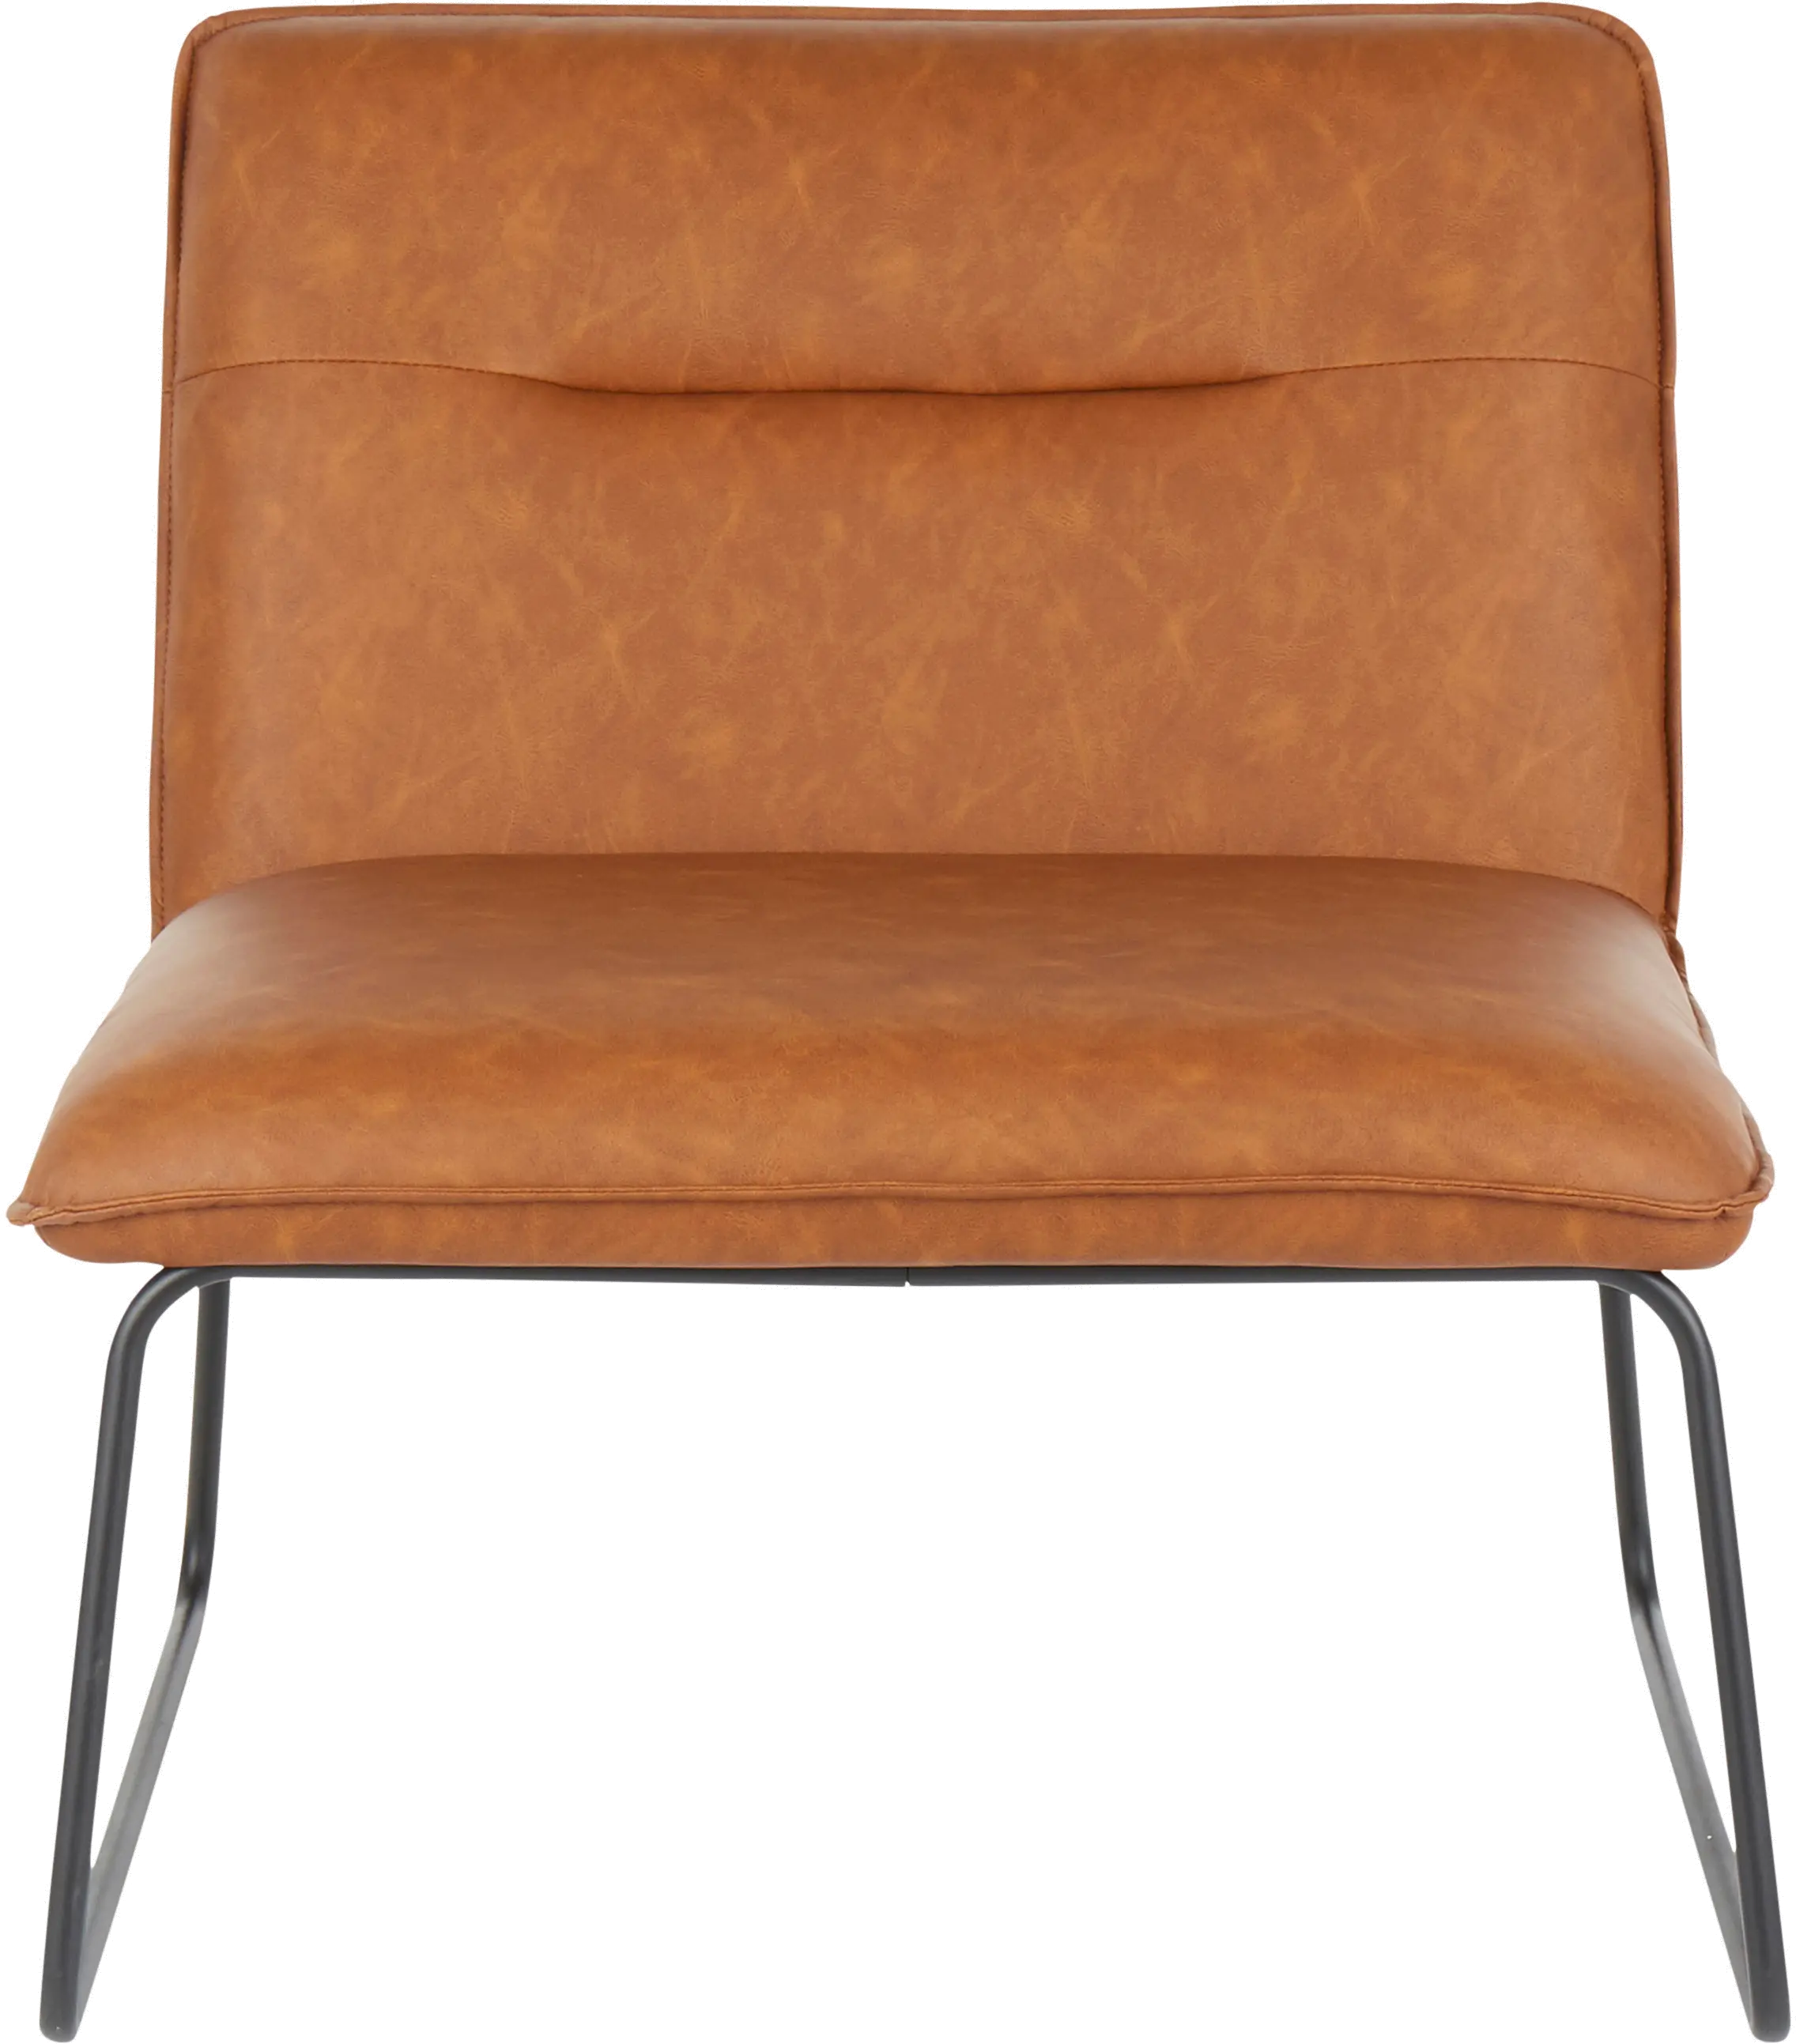 Casper Industrial Camel Faux Leather Accent Chair